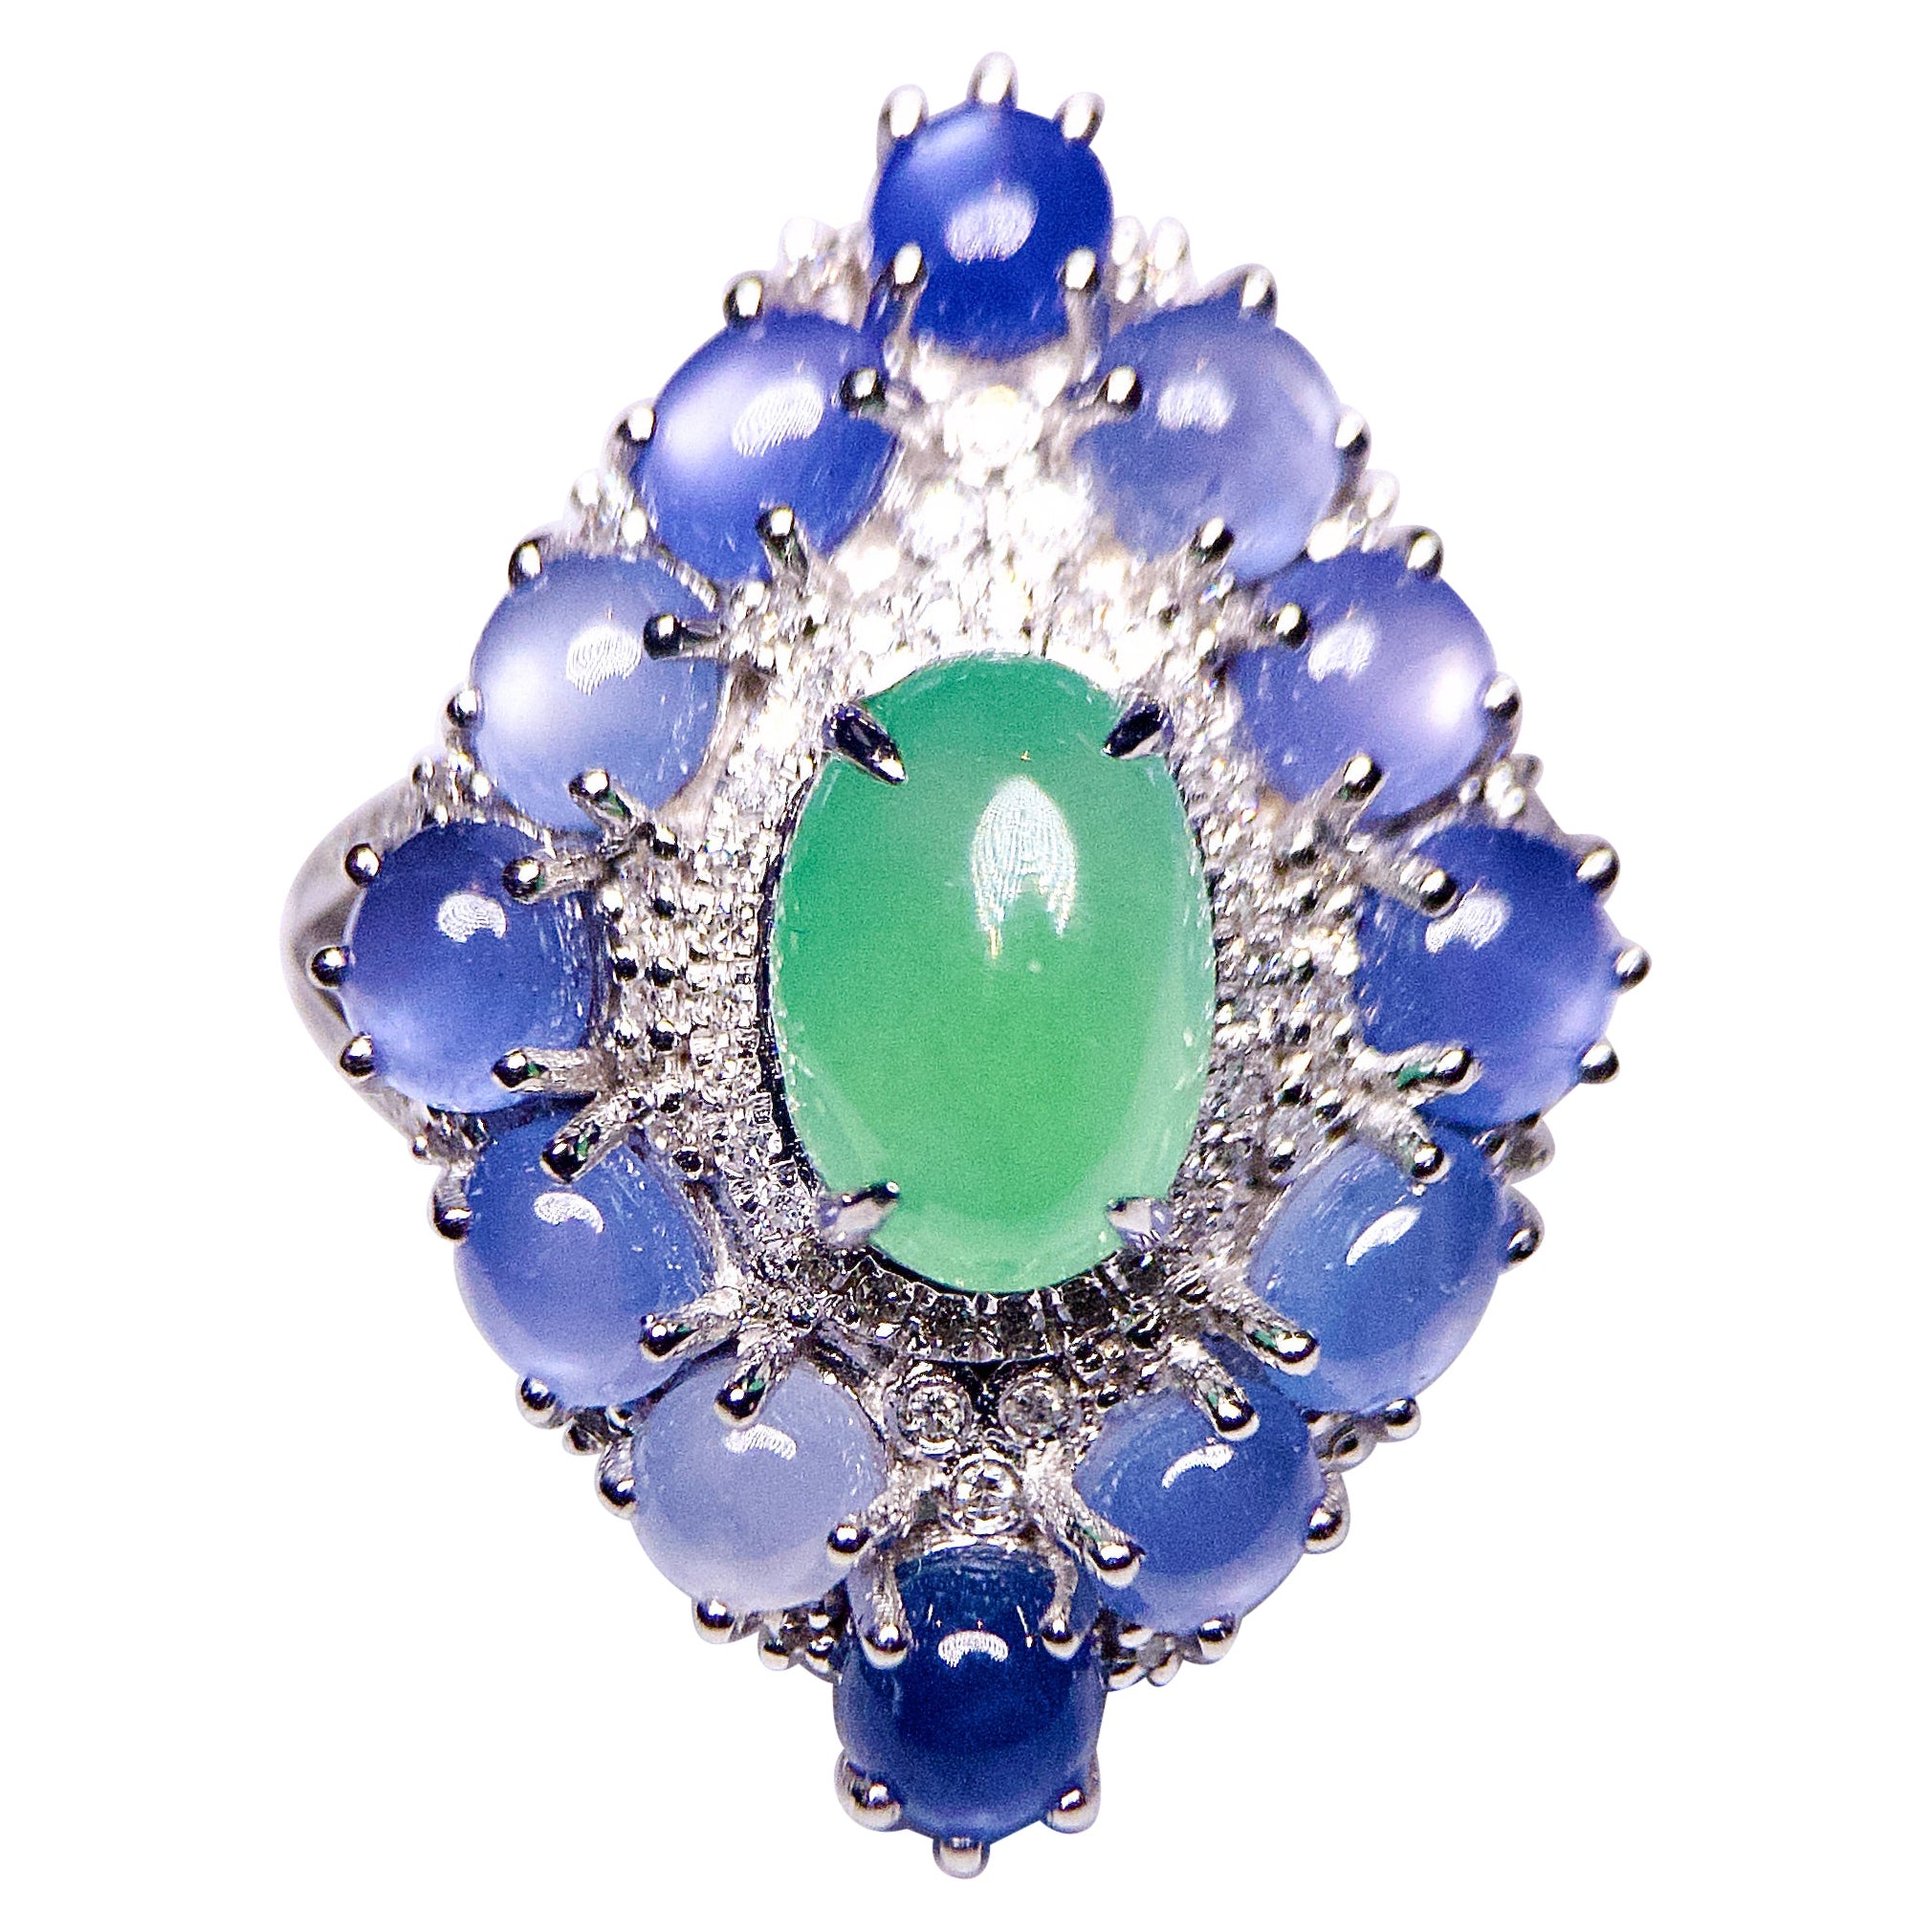 Eostre Type A Green Jadeite, Star Sapphire and Diamond Ring in 18K White Gold